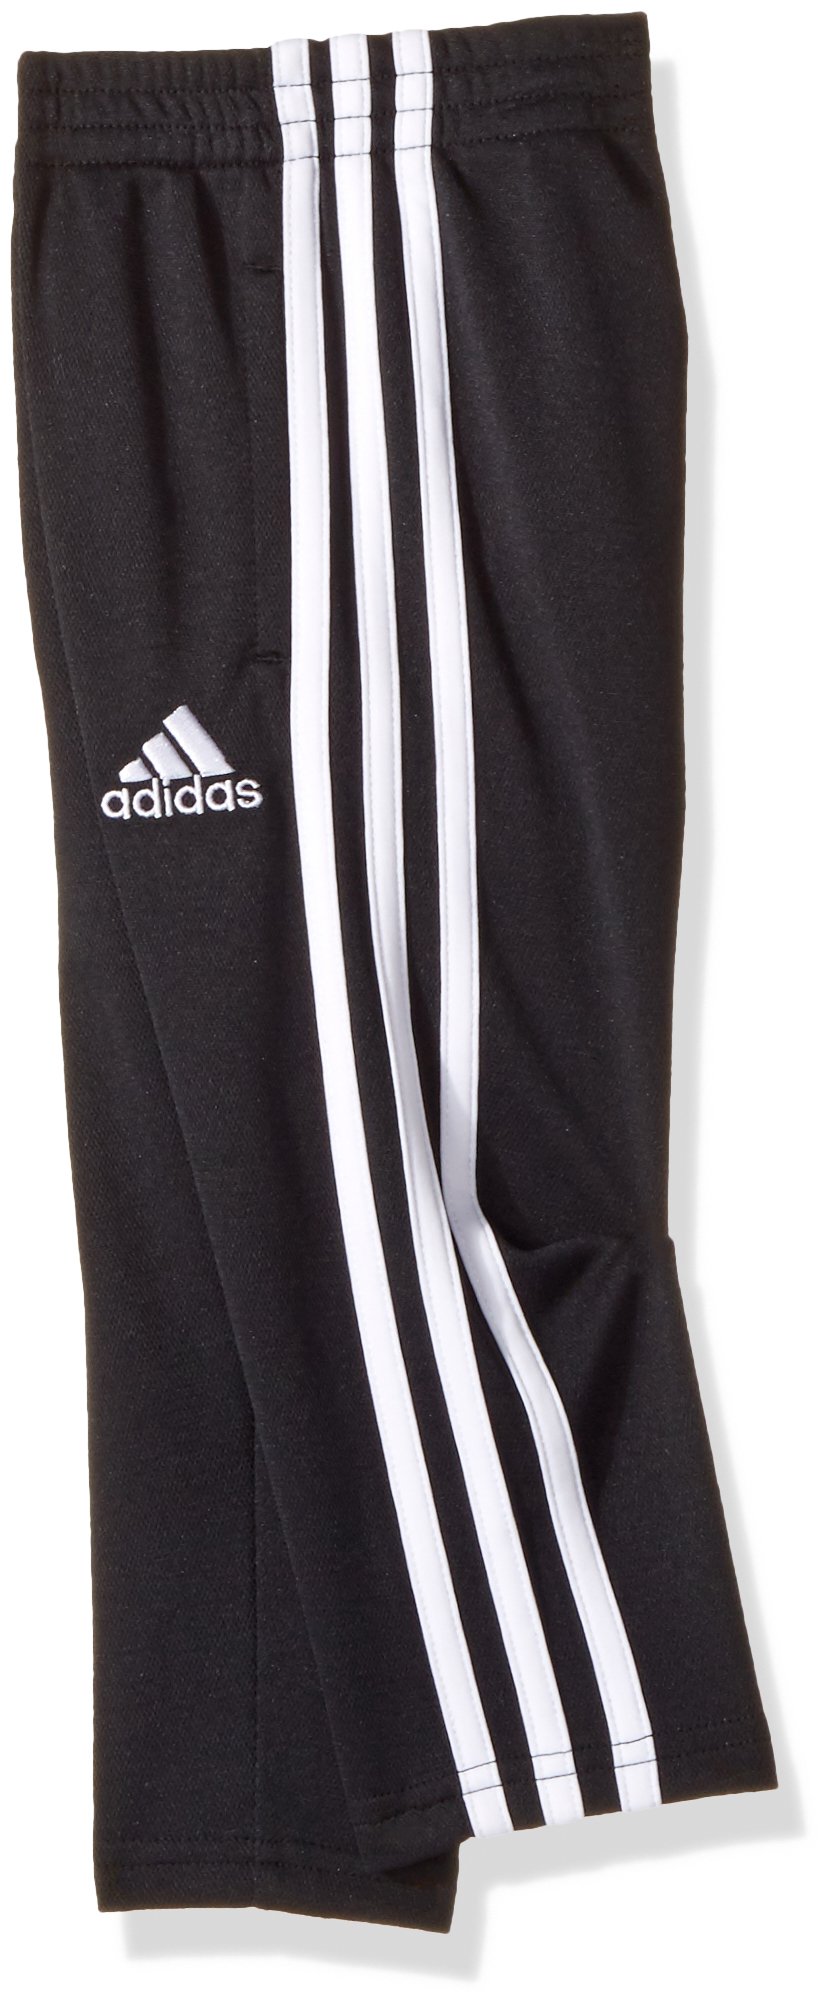 adidas Boys' Tapered Trainer Pant